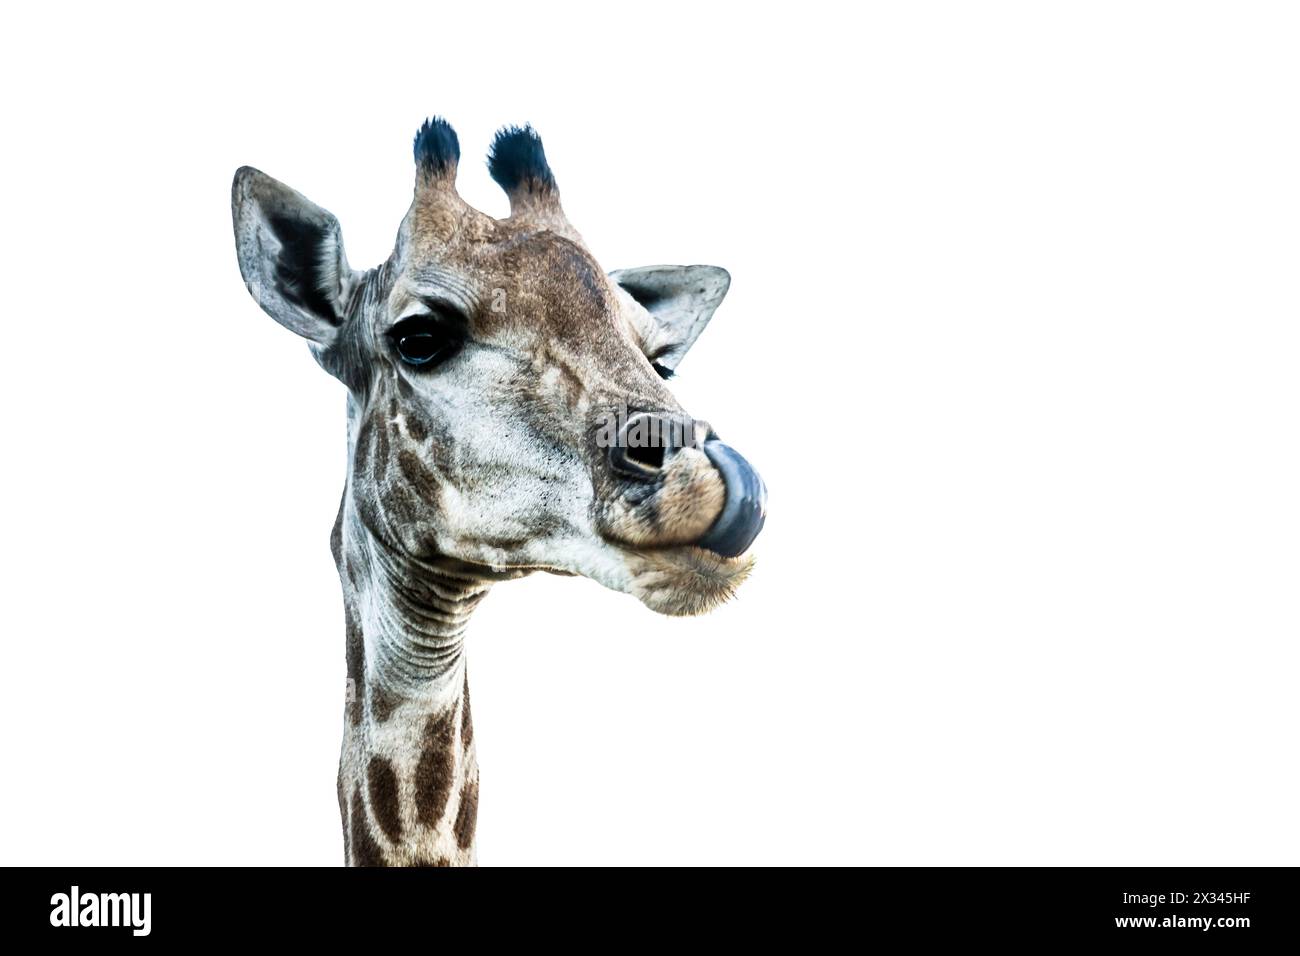 Giraffe funny portrait isolated in white background in Kruger National park, South Africa ; Specie Giraffa camelopardalis family of Giraffidae Stock Photo